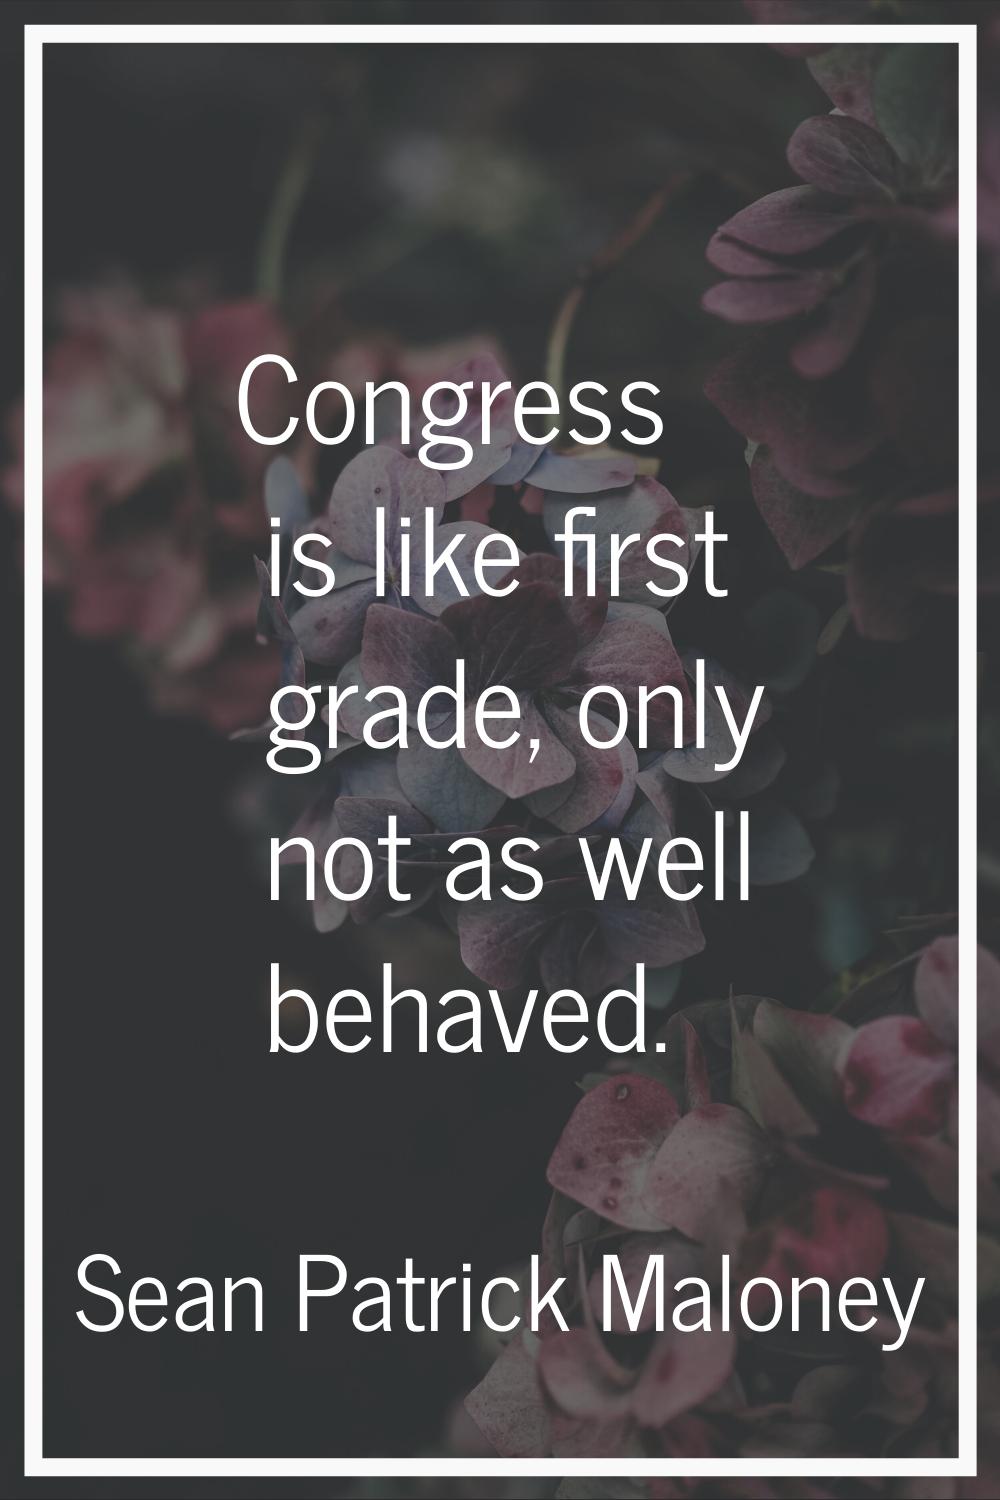 Congress is like first grade, only not as well behaved.